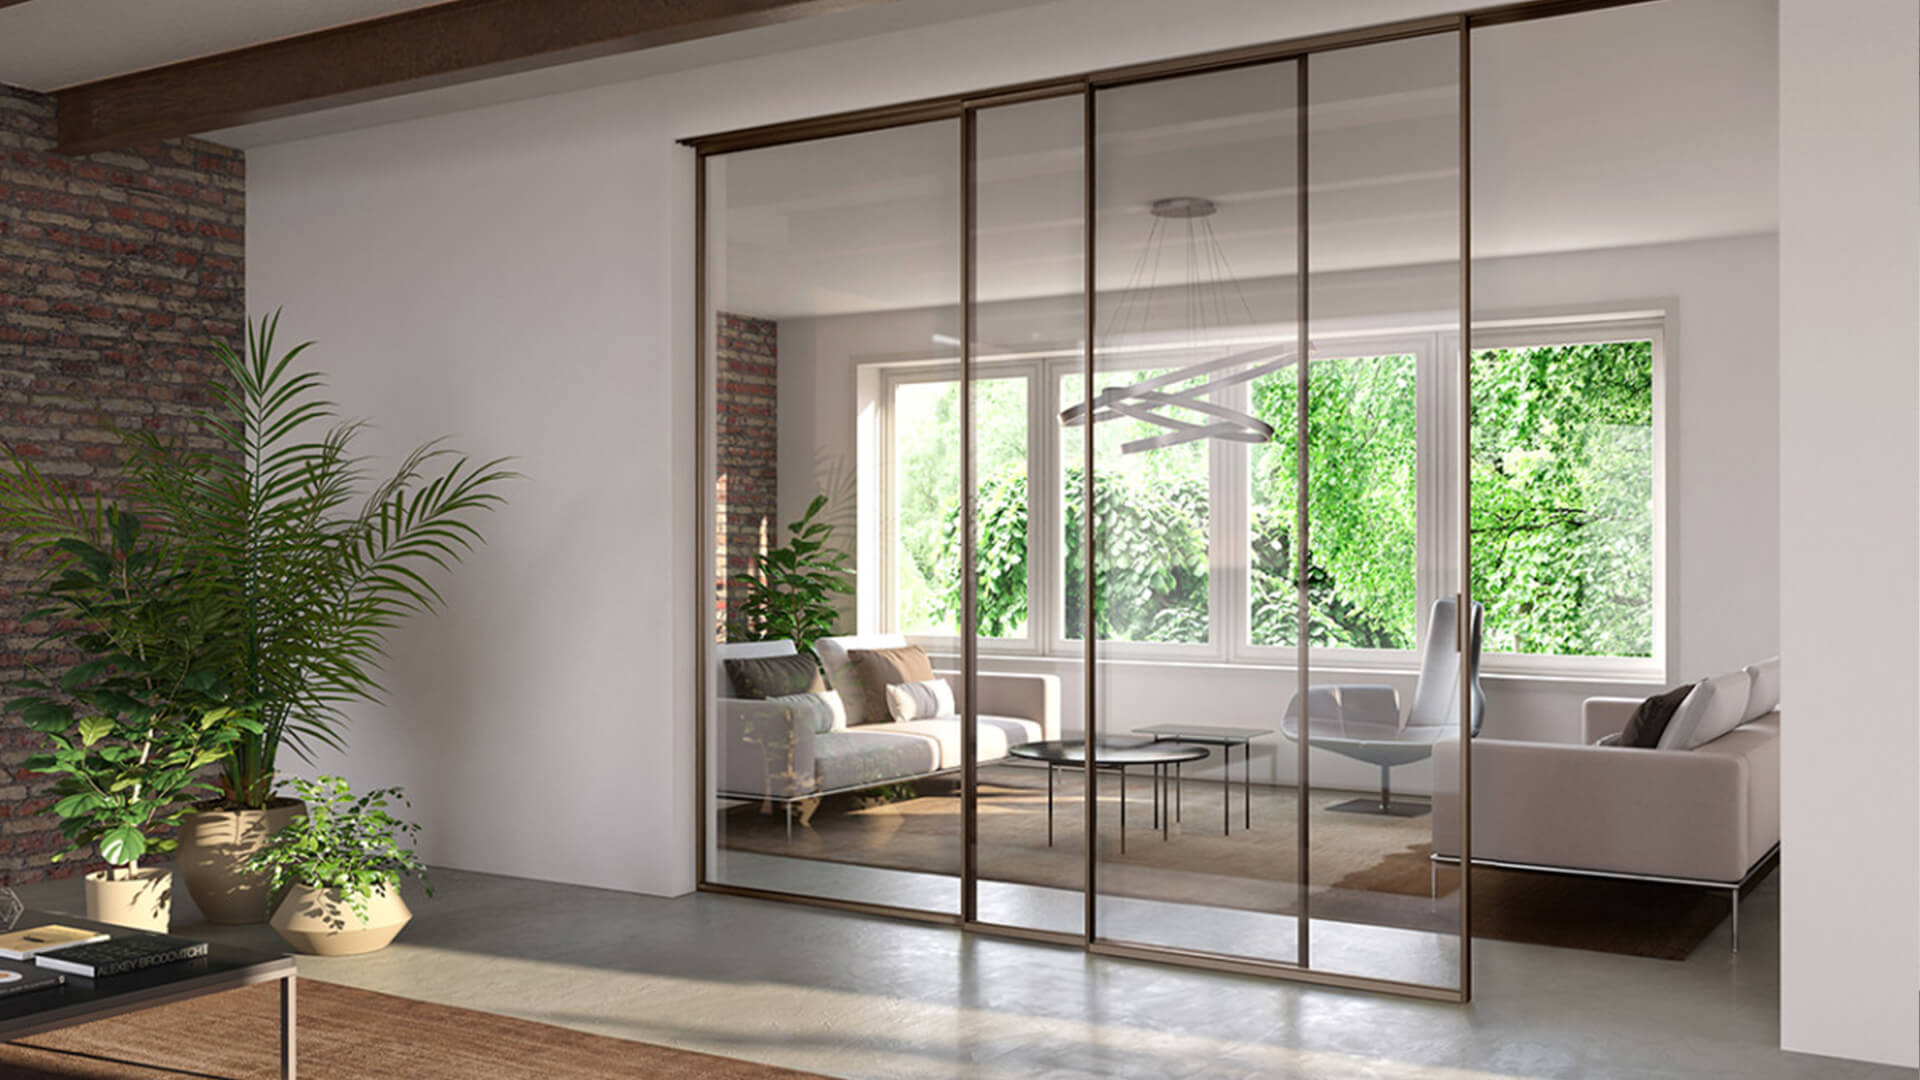 Blog IDW - How to choose the doors of your home